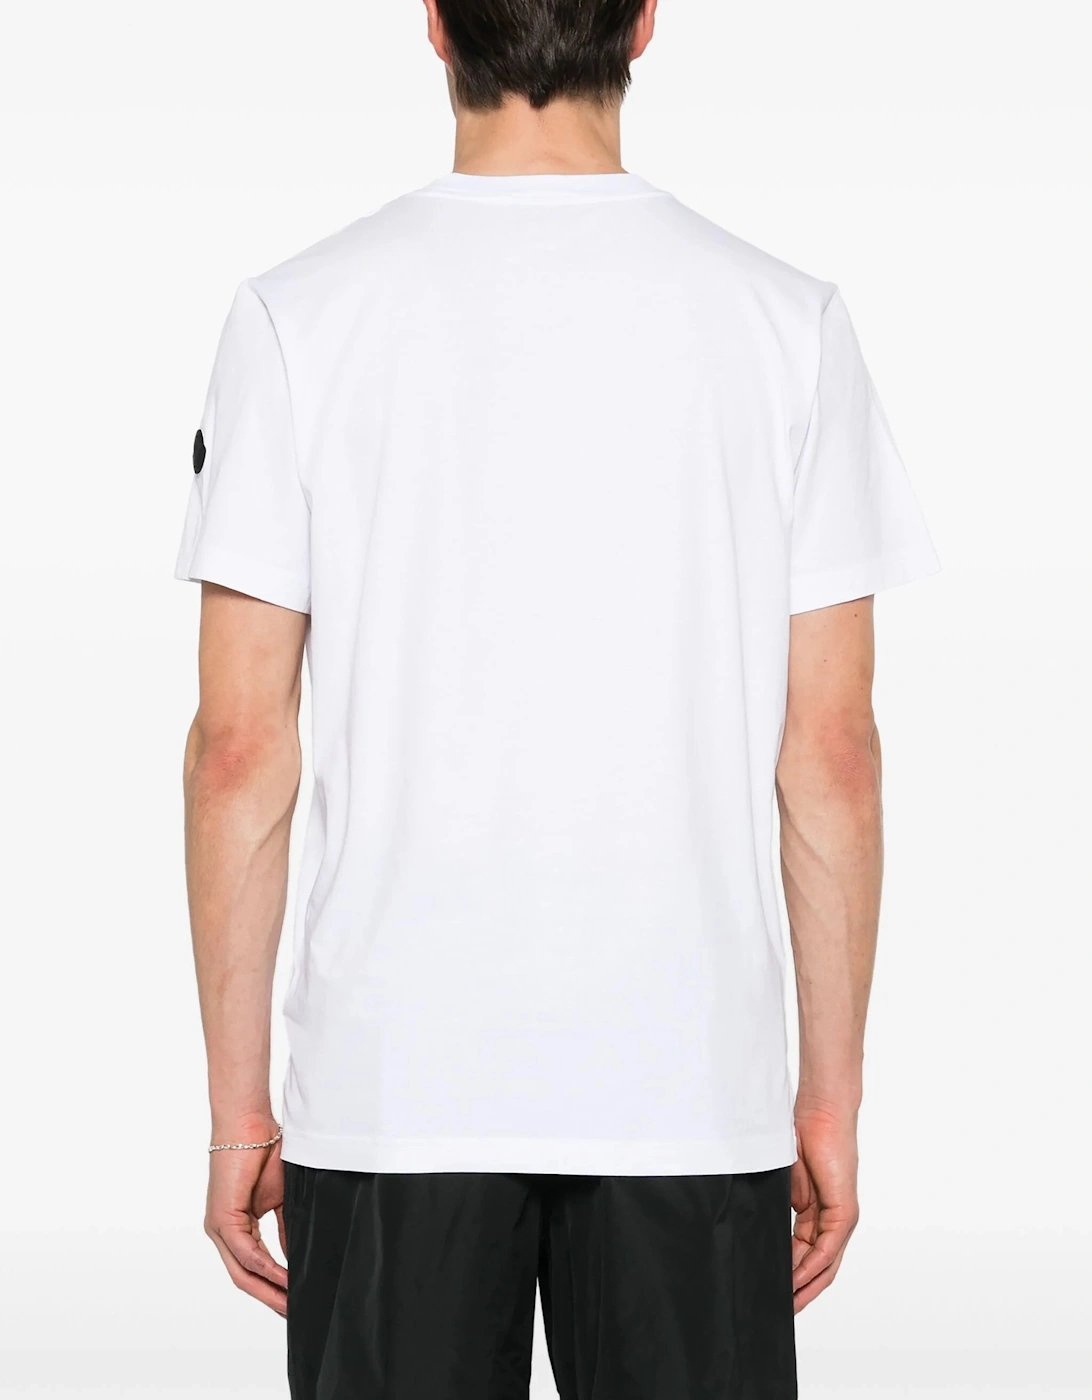 Appliqué-logo Outline Printed T-Shirt in White